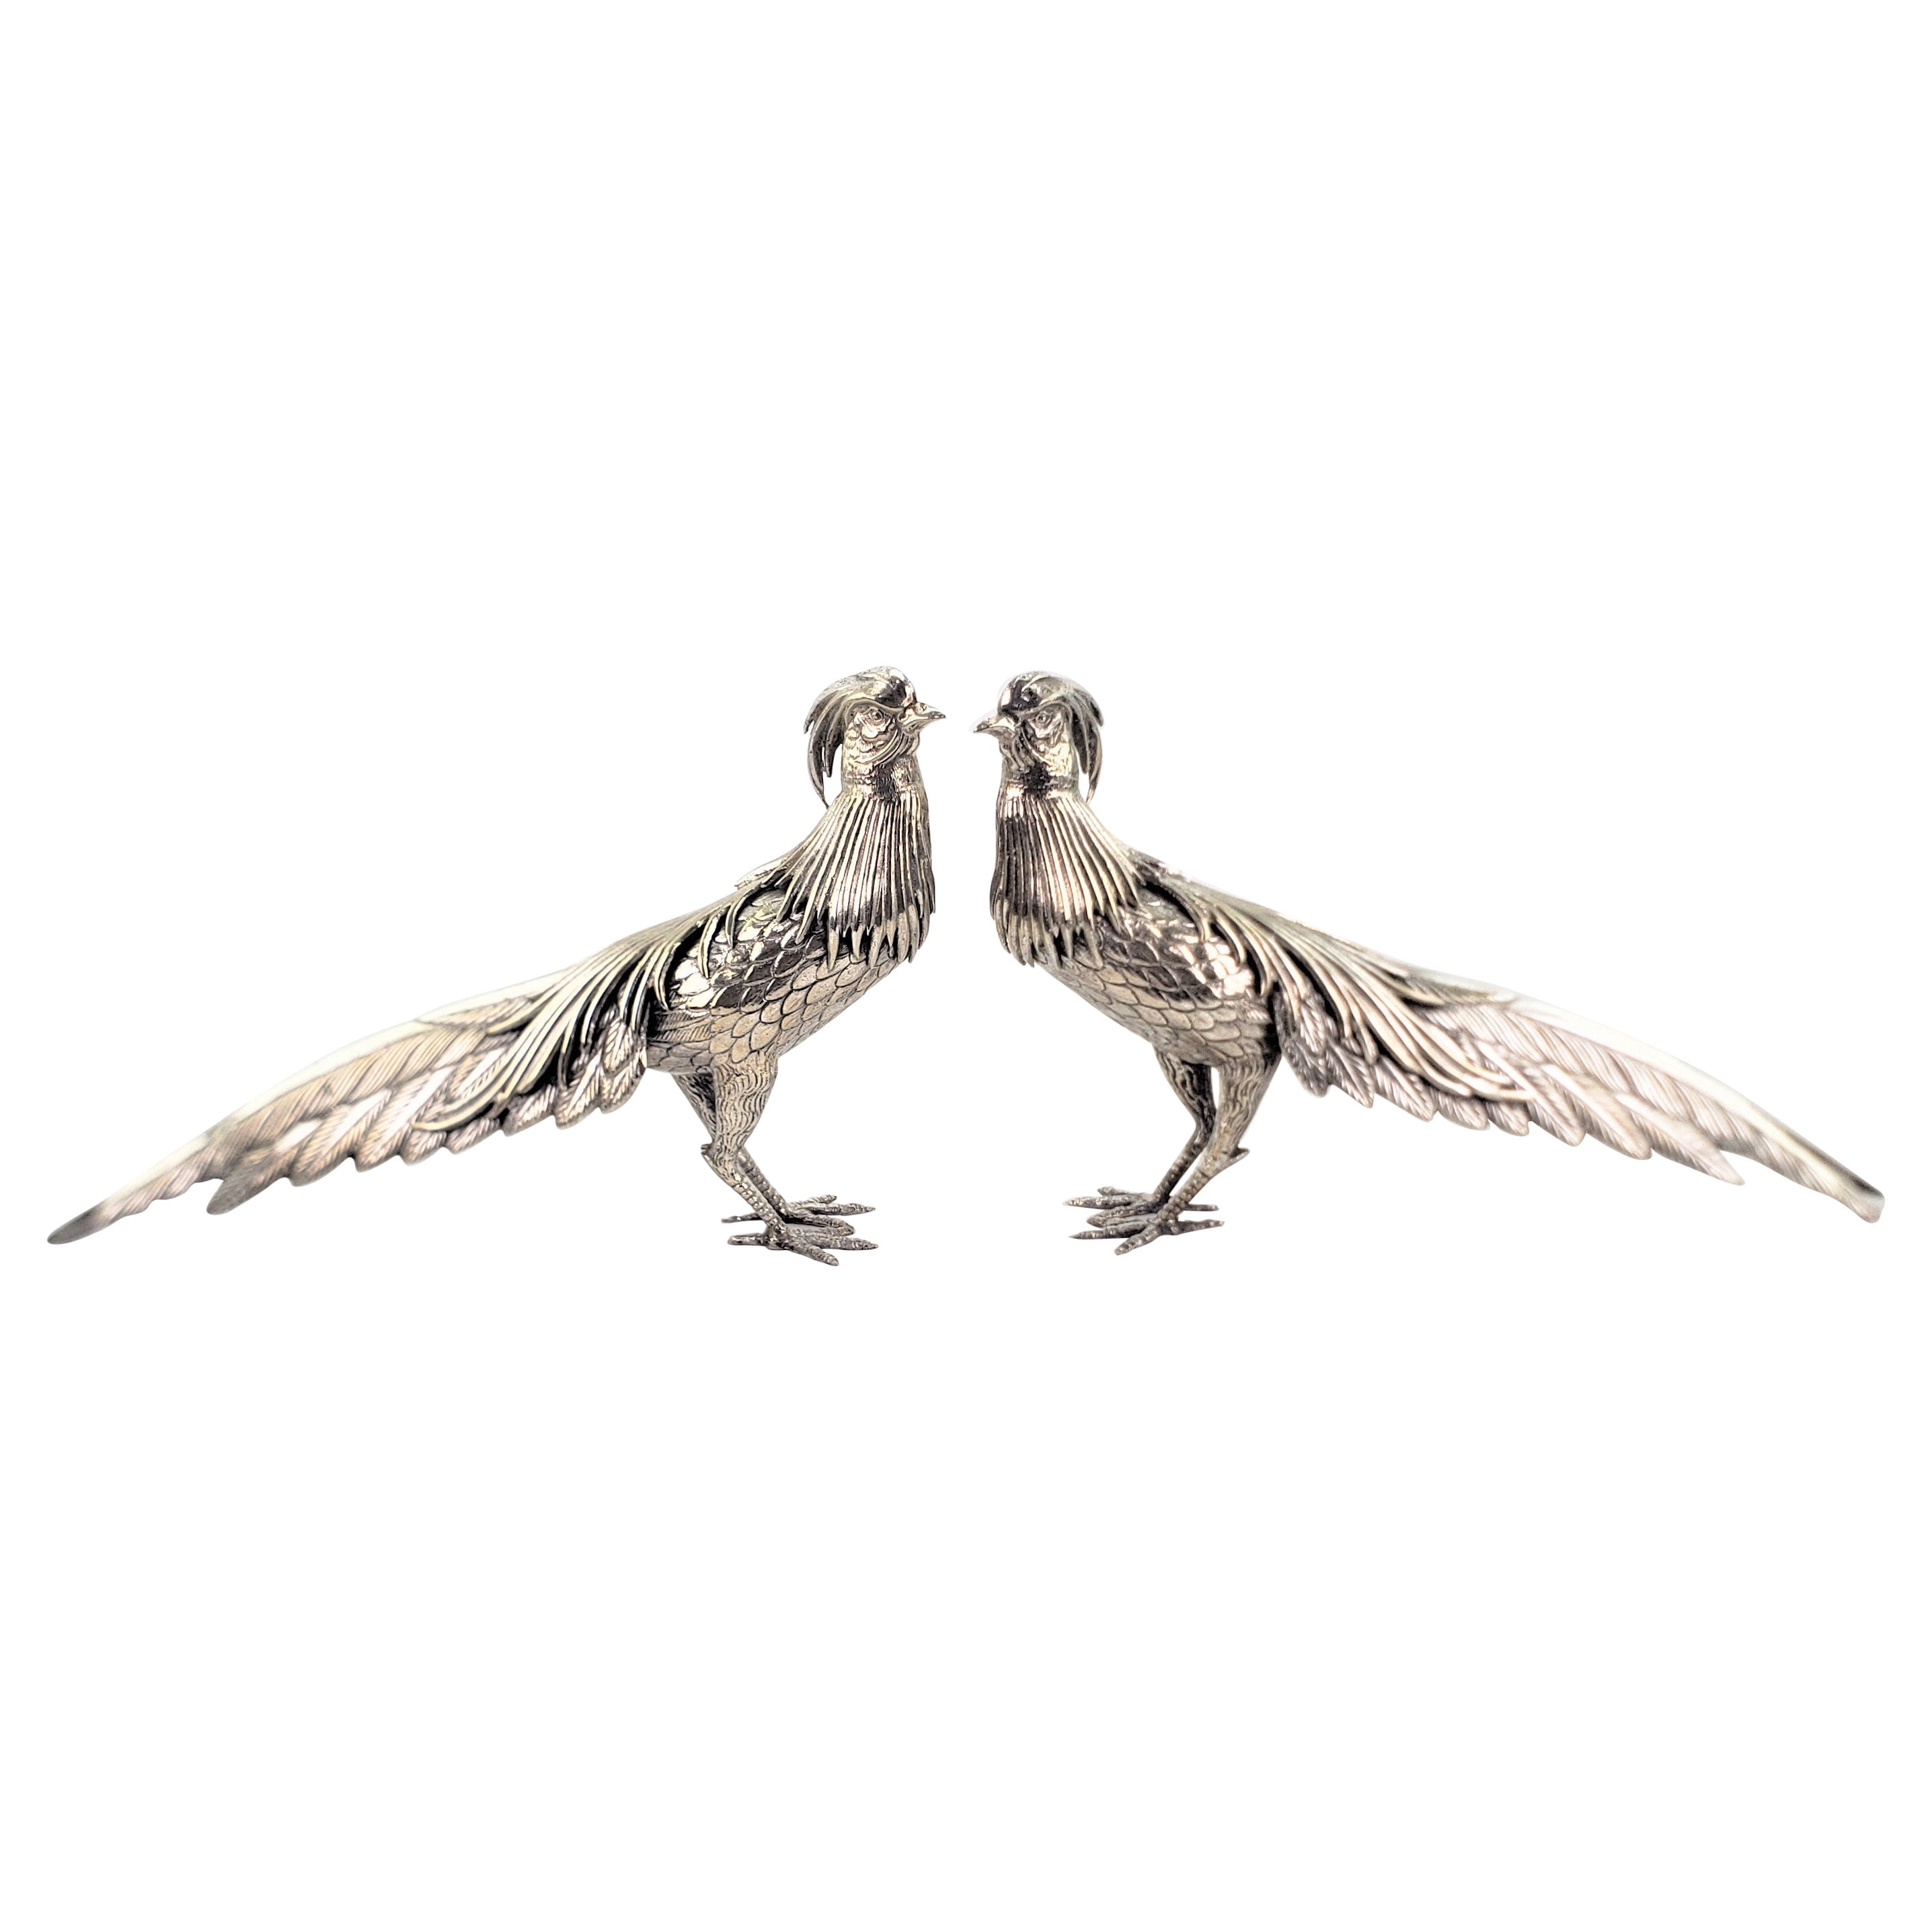 Pair of Antique Silver Plated Decorative Exotic Bird or Pheasant Sculptures